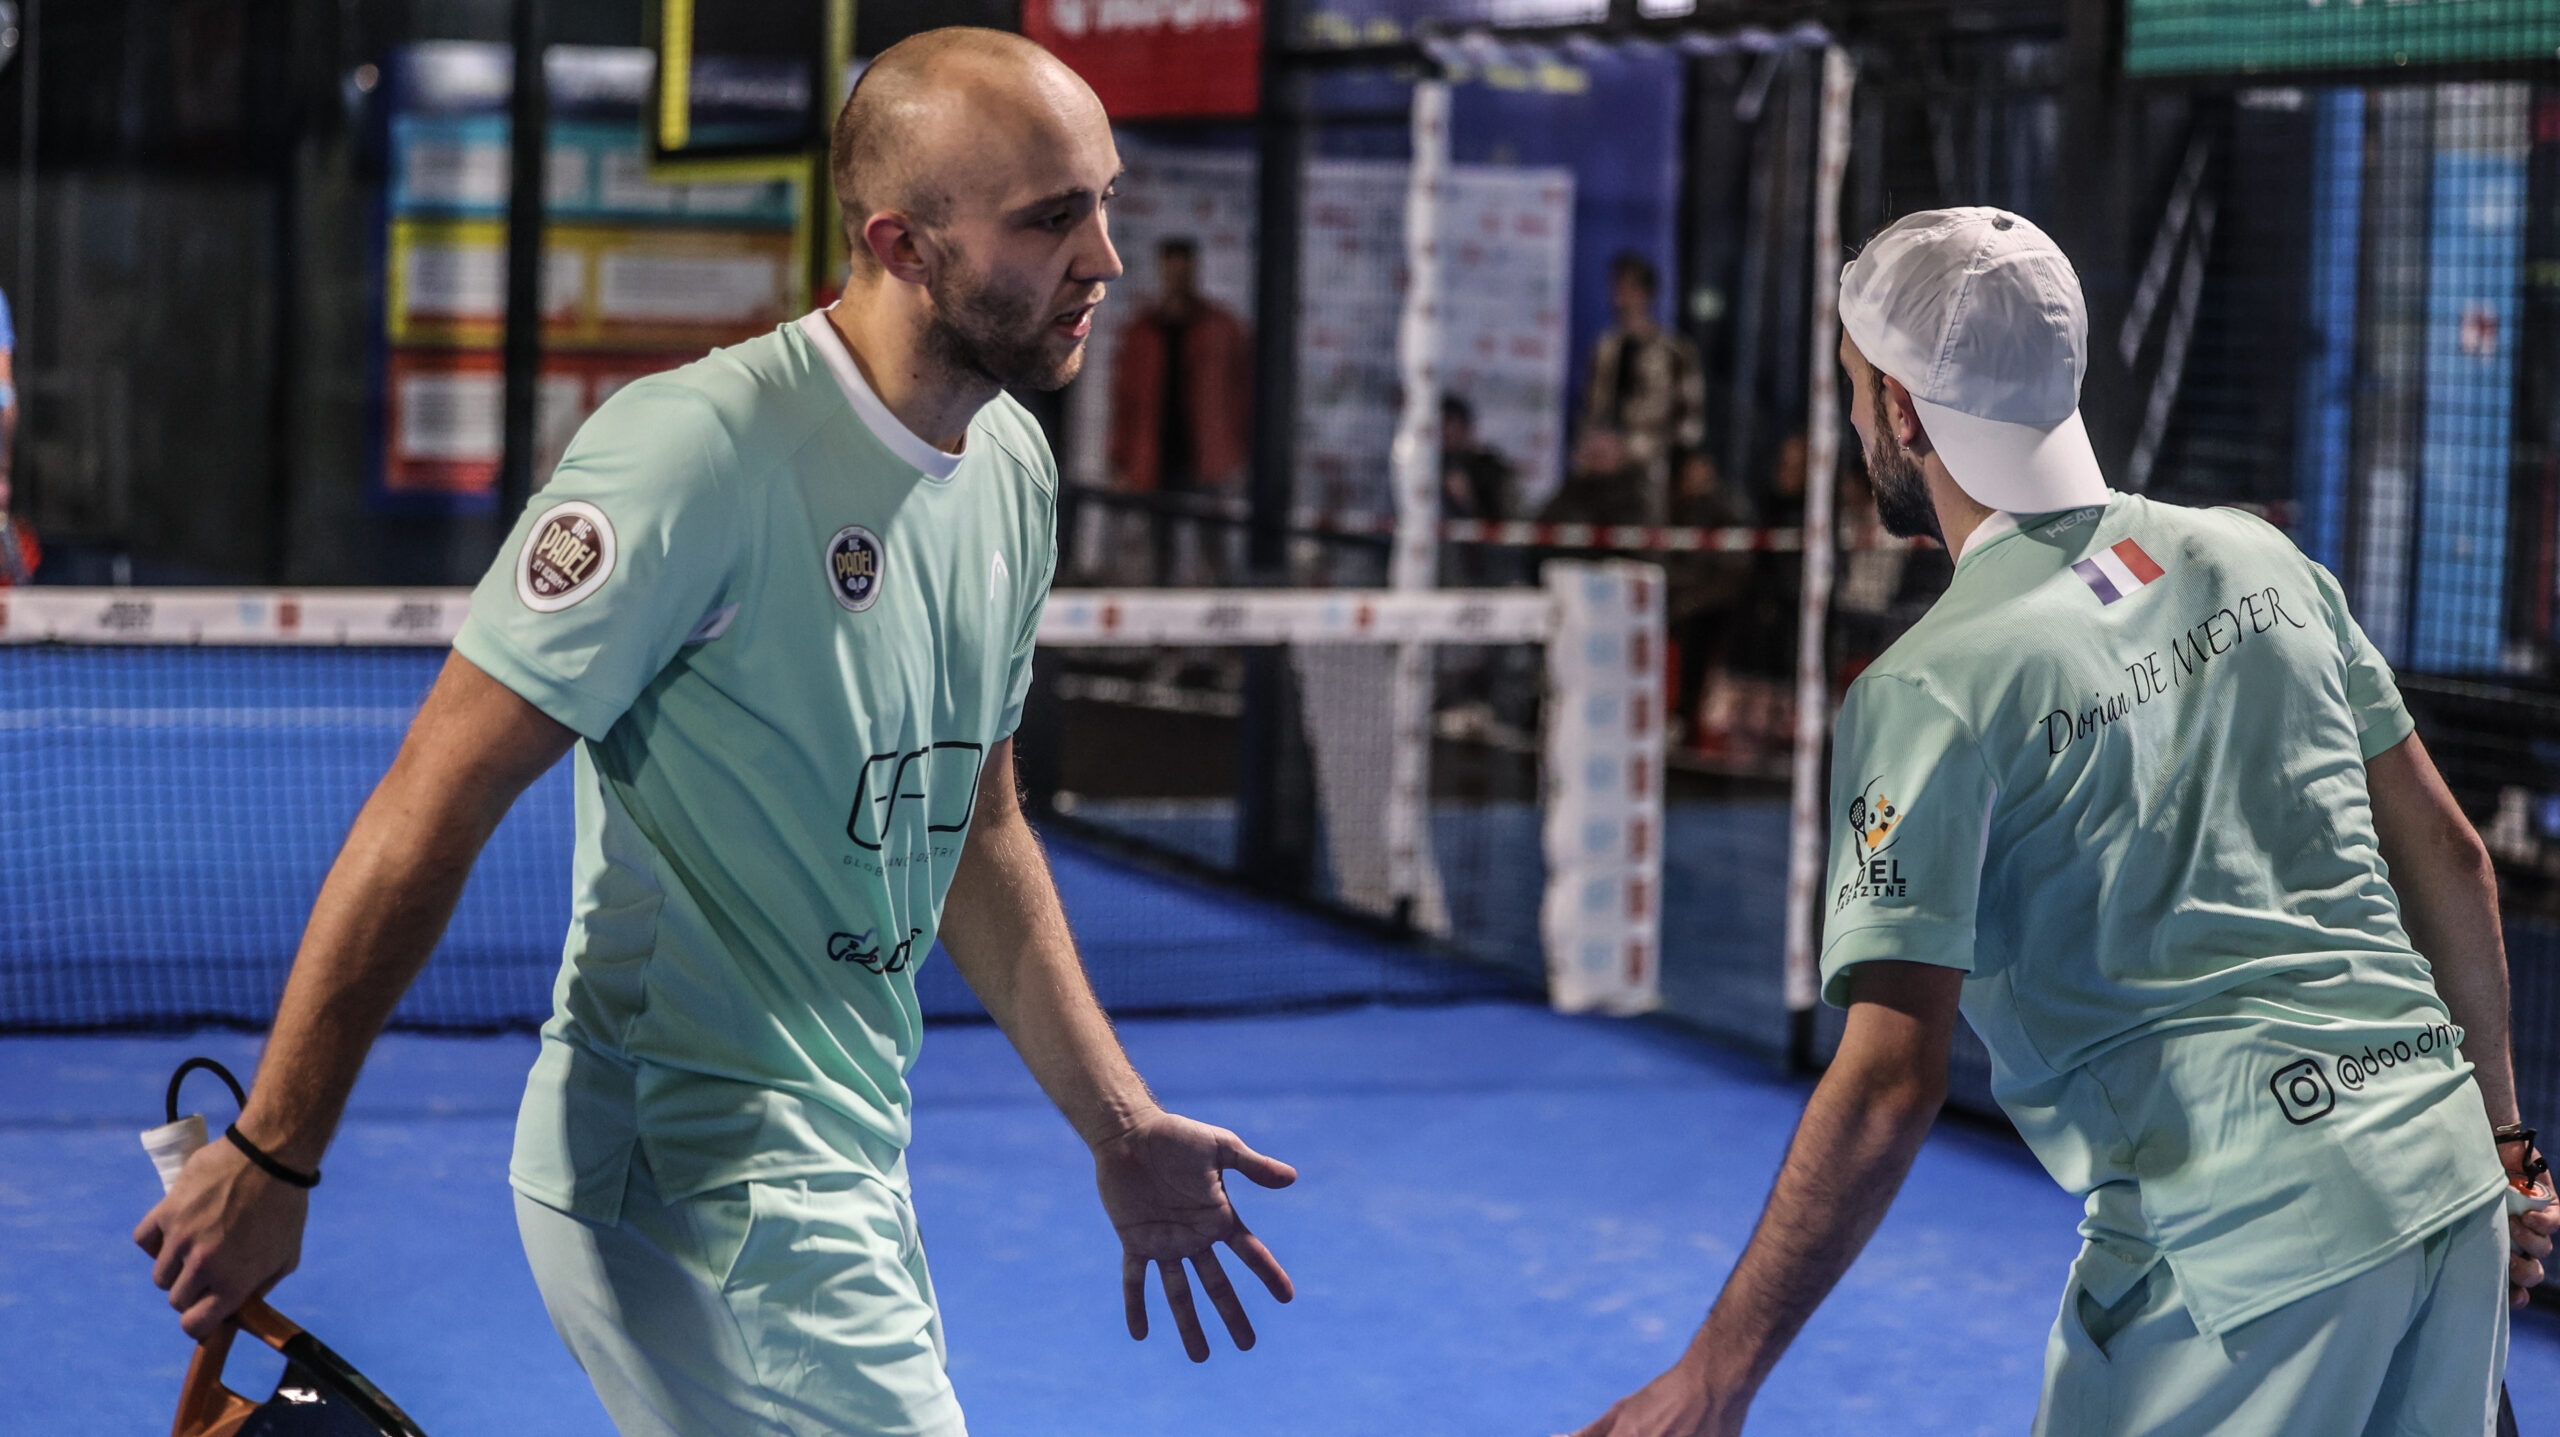 Fip Promotion Padel Asia – End of the adventure for Vanbauce and De Meyer